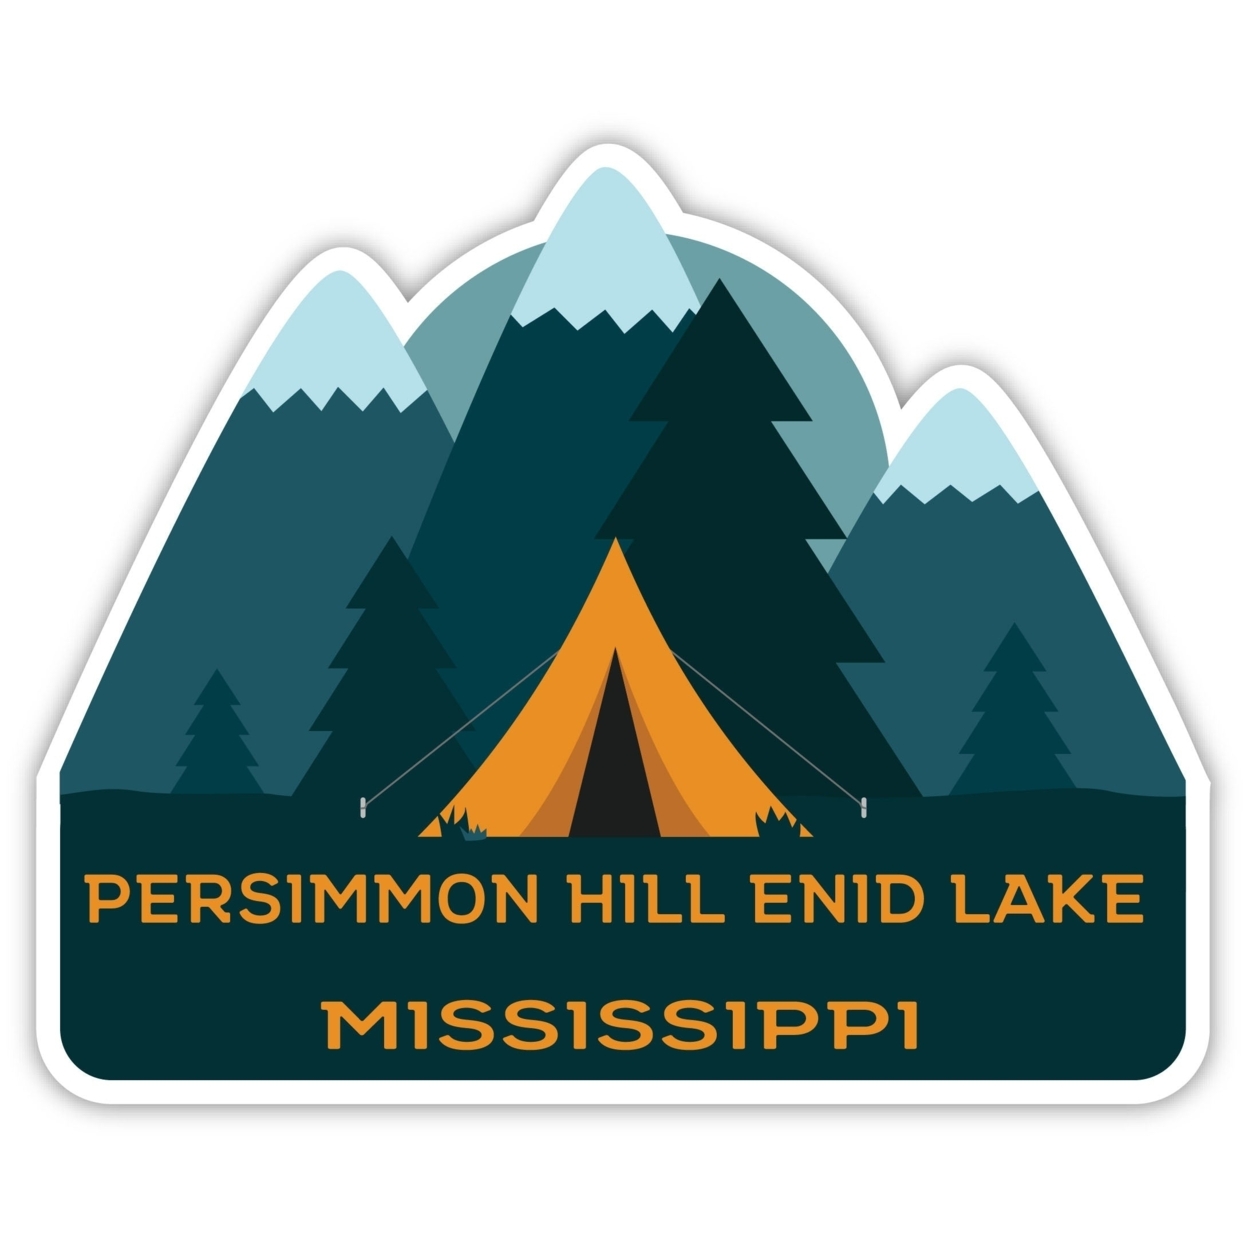 Persimmon Hill Enid Lake Mississippi Souvenir Decorative Stickers (Choose Theme And Size) - Single Unit, 4-Inch, Tent